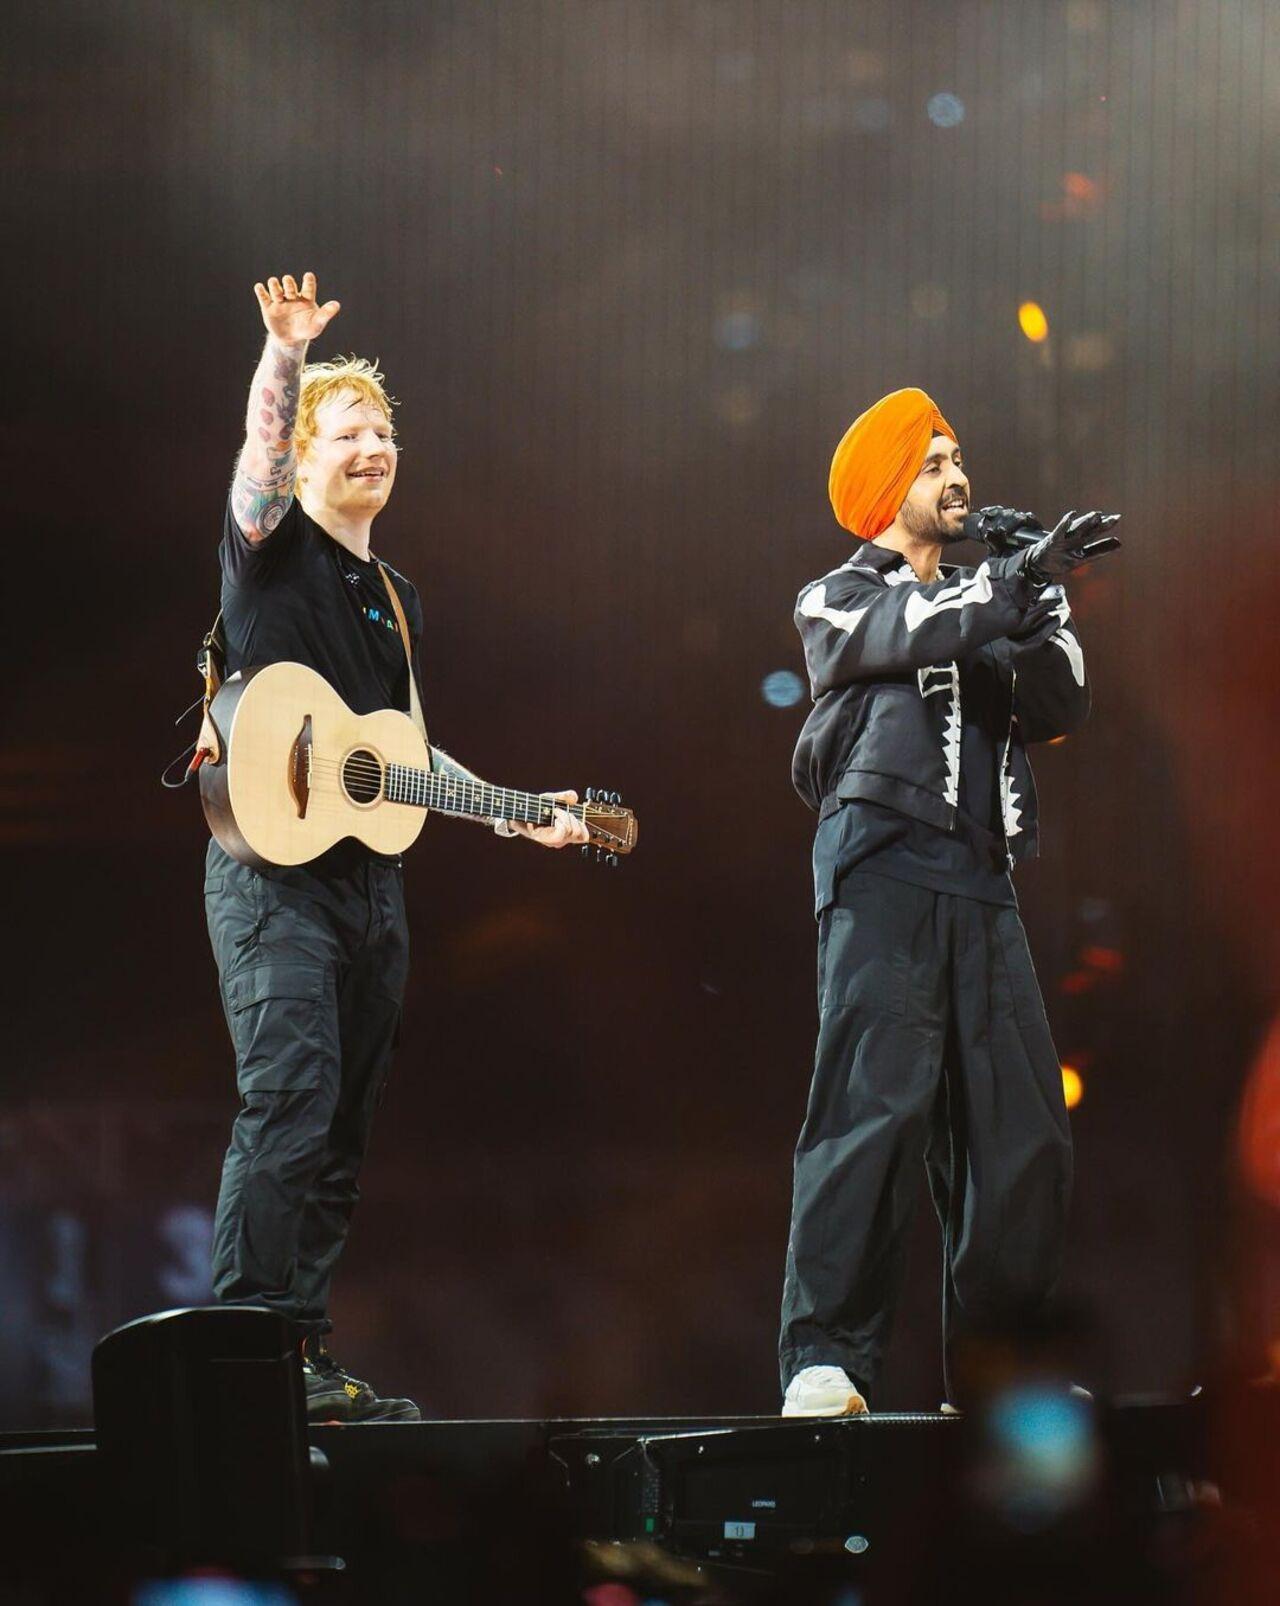 Ed Sheeran performed in Mumbai to a massive crowd on Saturday evening